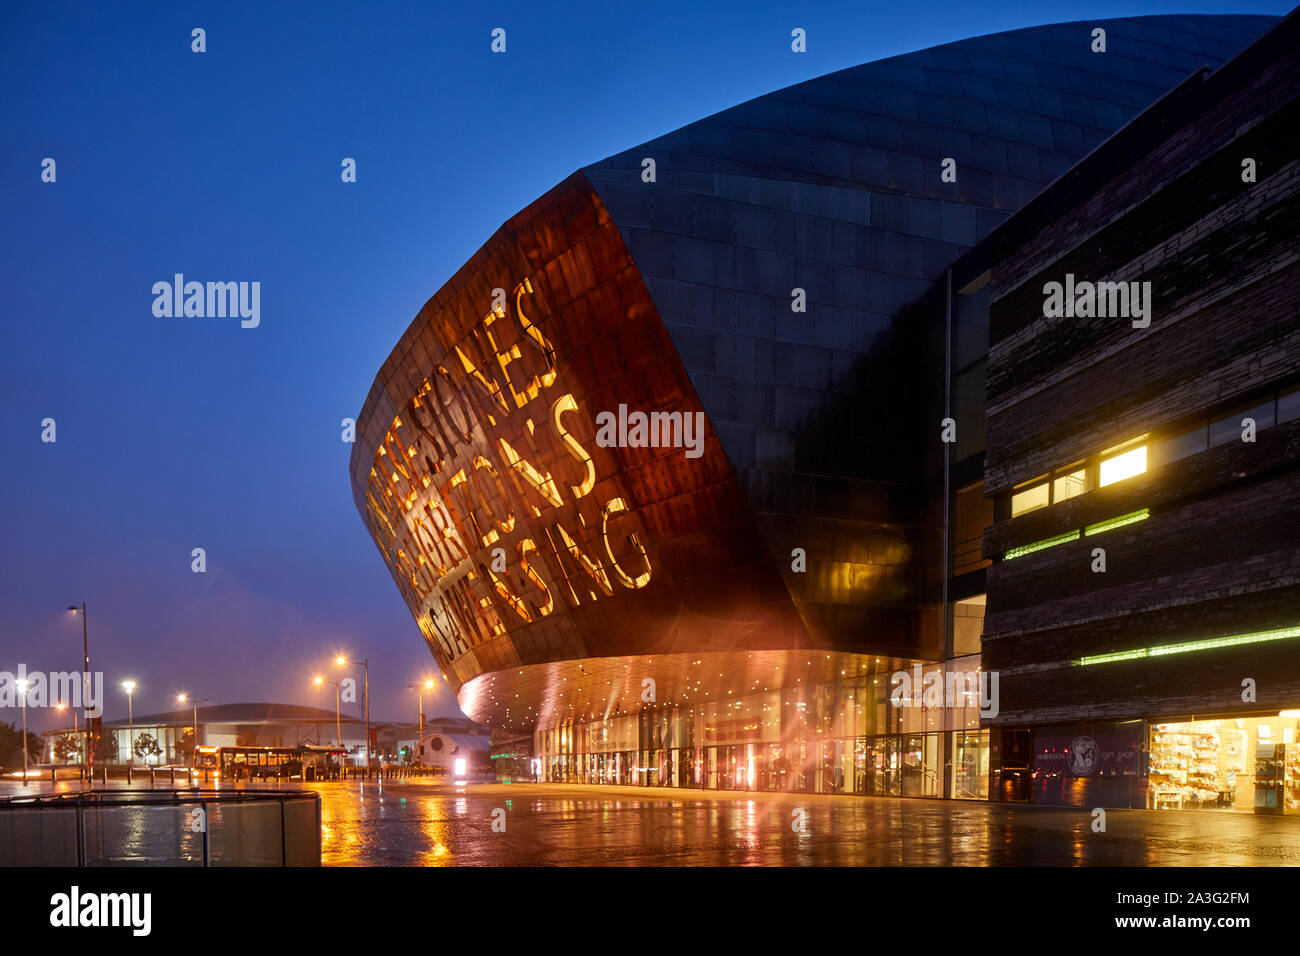 Wales Millennium Centre arts centre theatre located Cardiff Bay designed by Percy Thomas Partnership Stock Photo